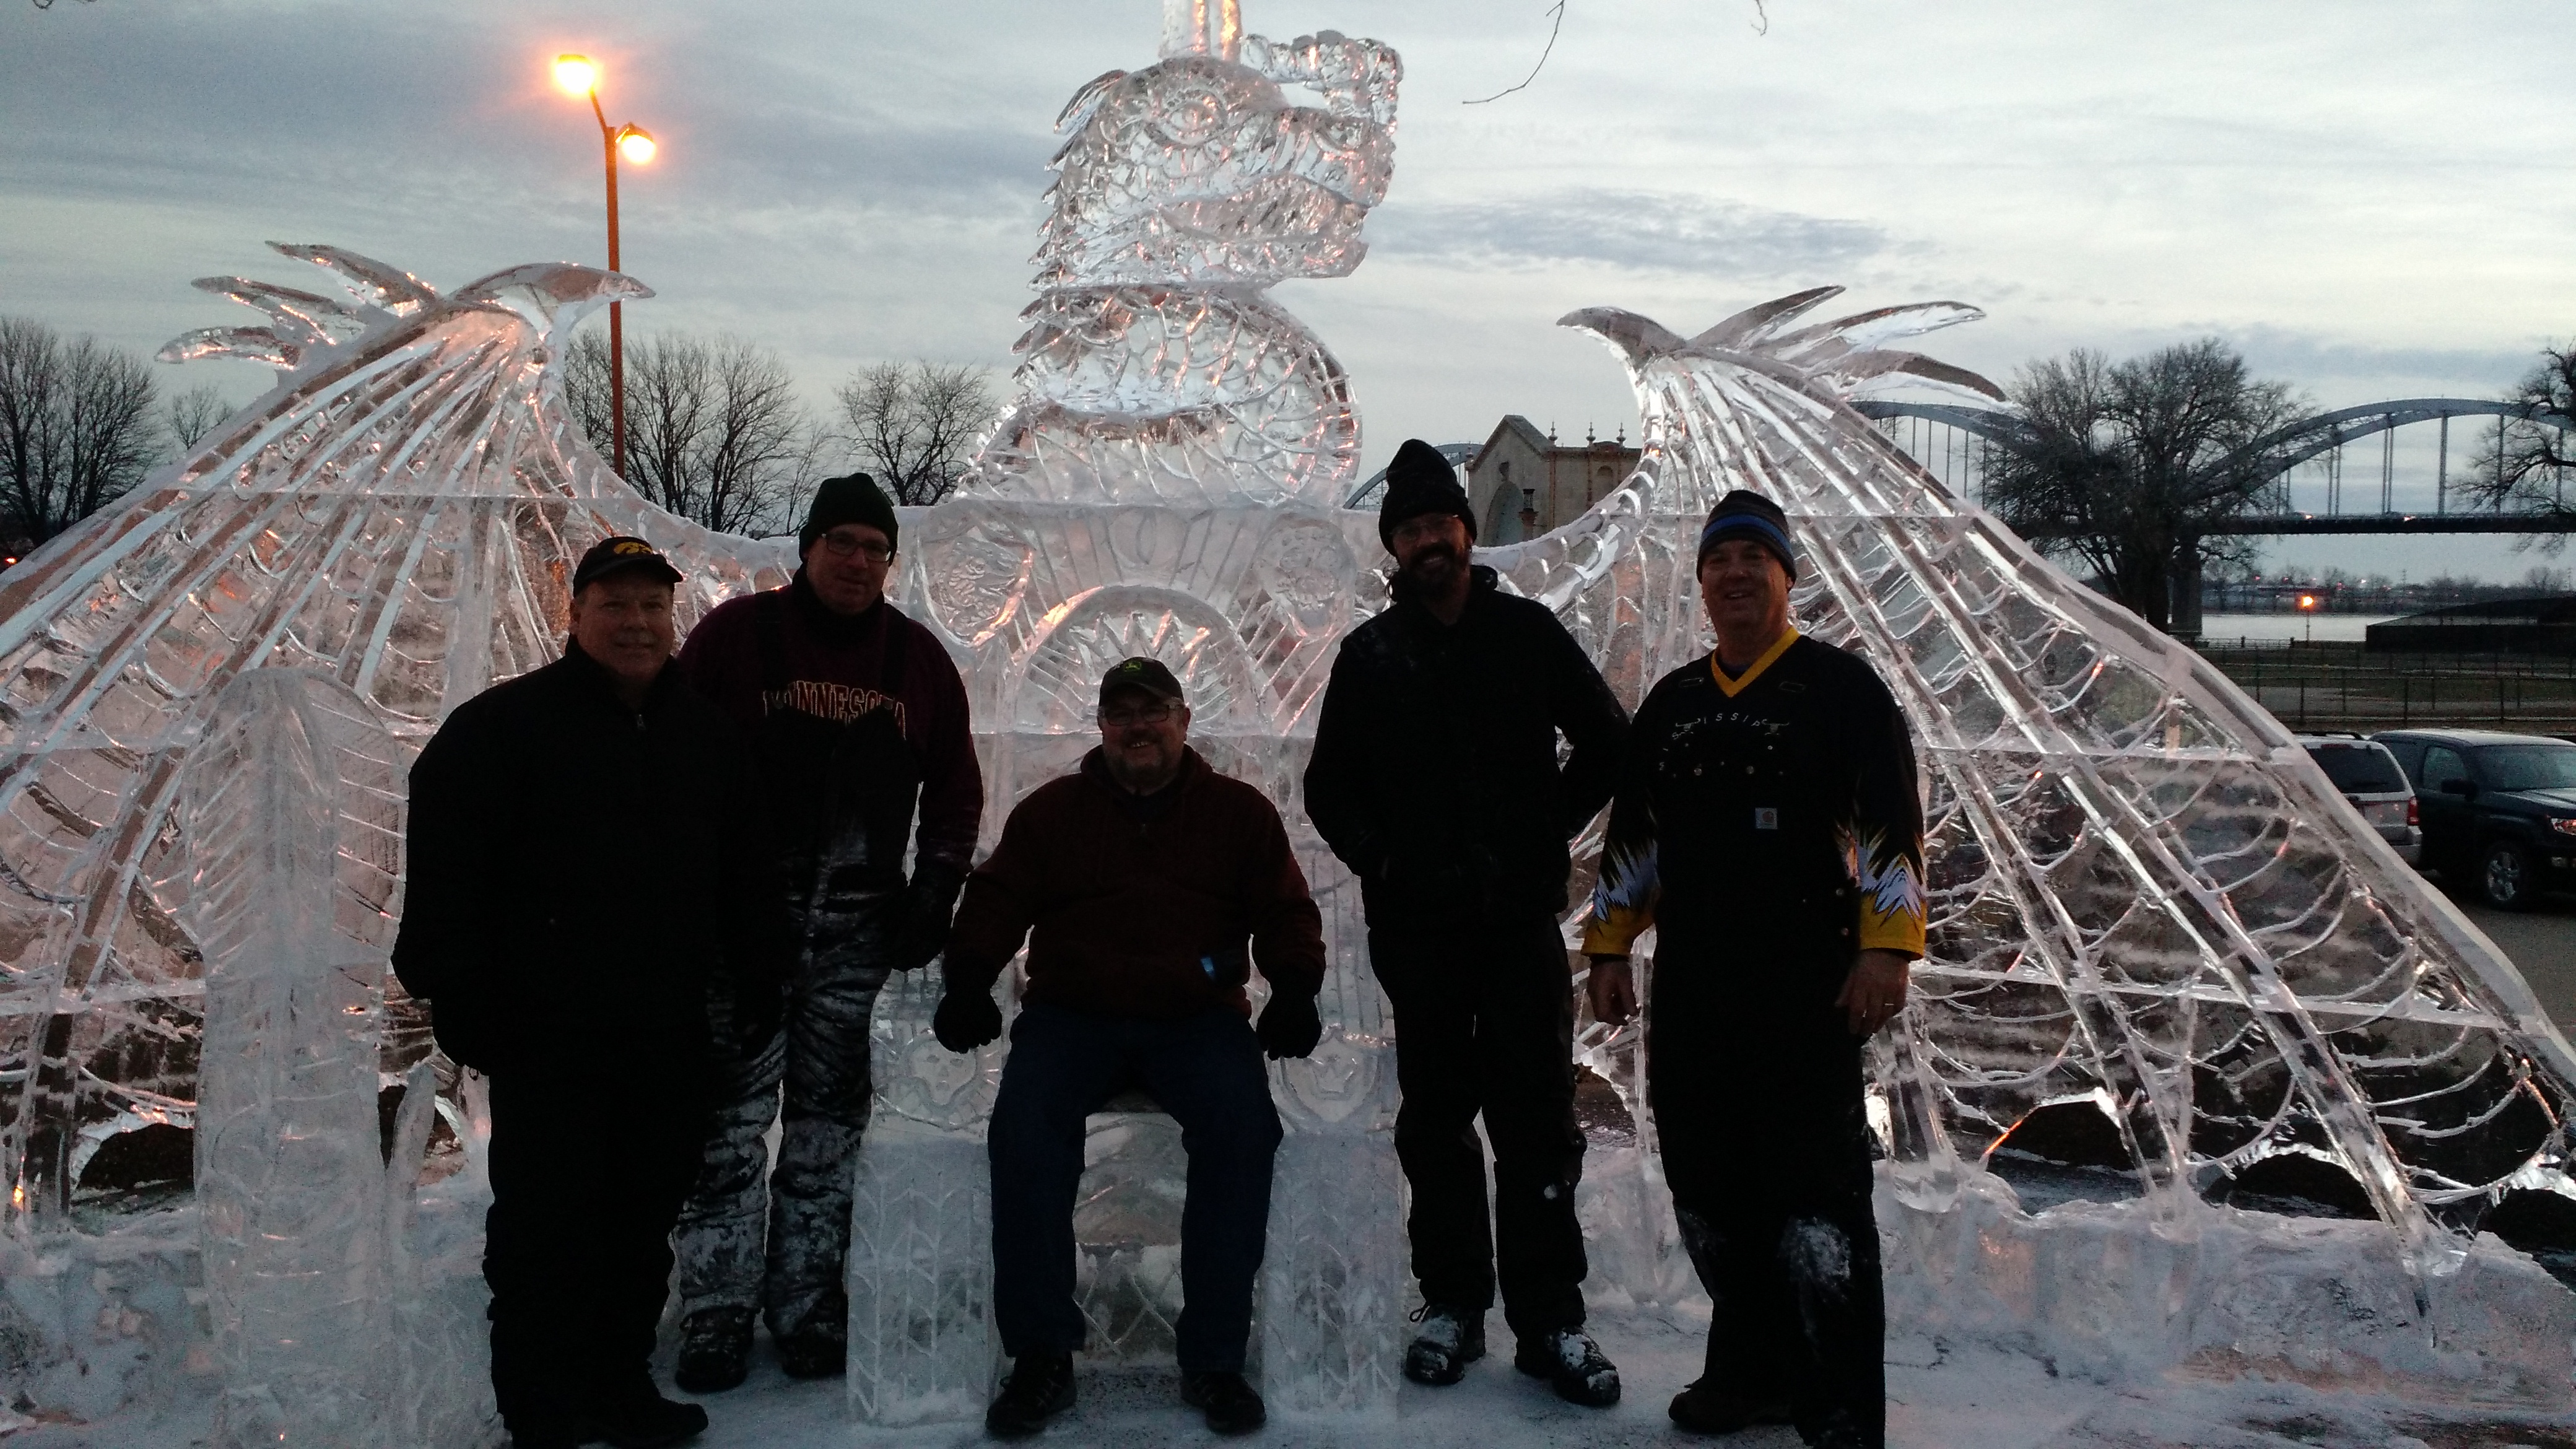 group shot of ice carvers at Icestravaganza